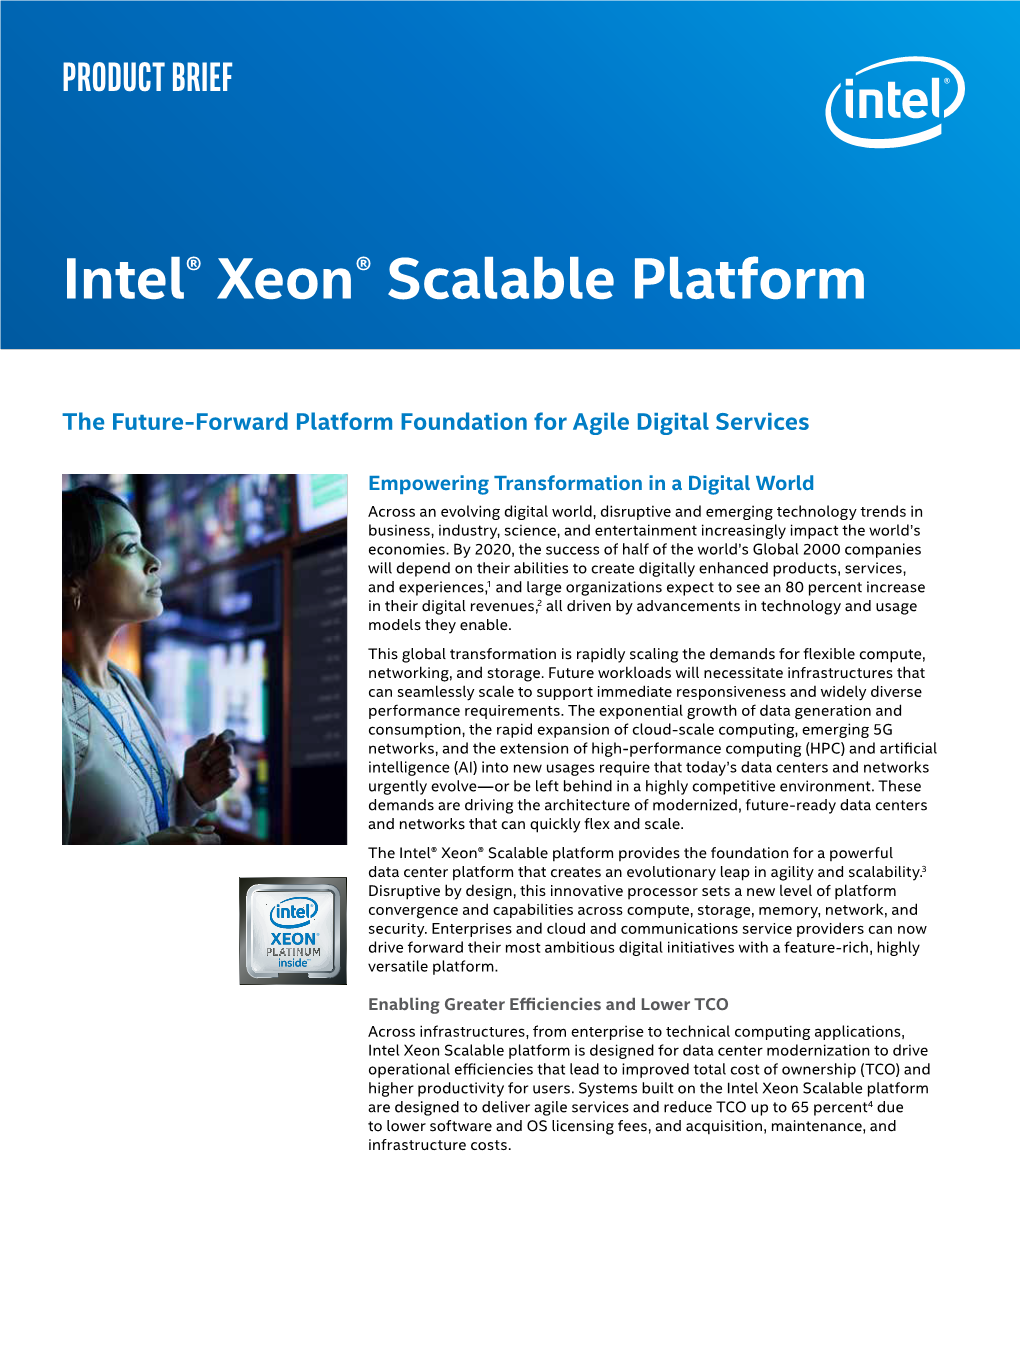 Product Brief: Intel® Xeon® Scalable Platform